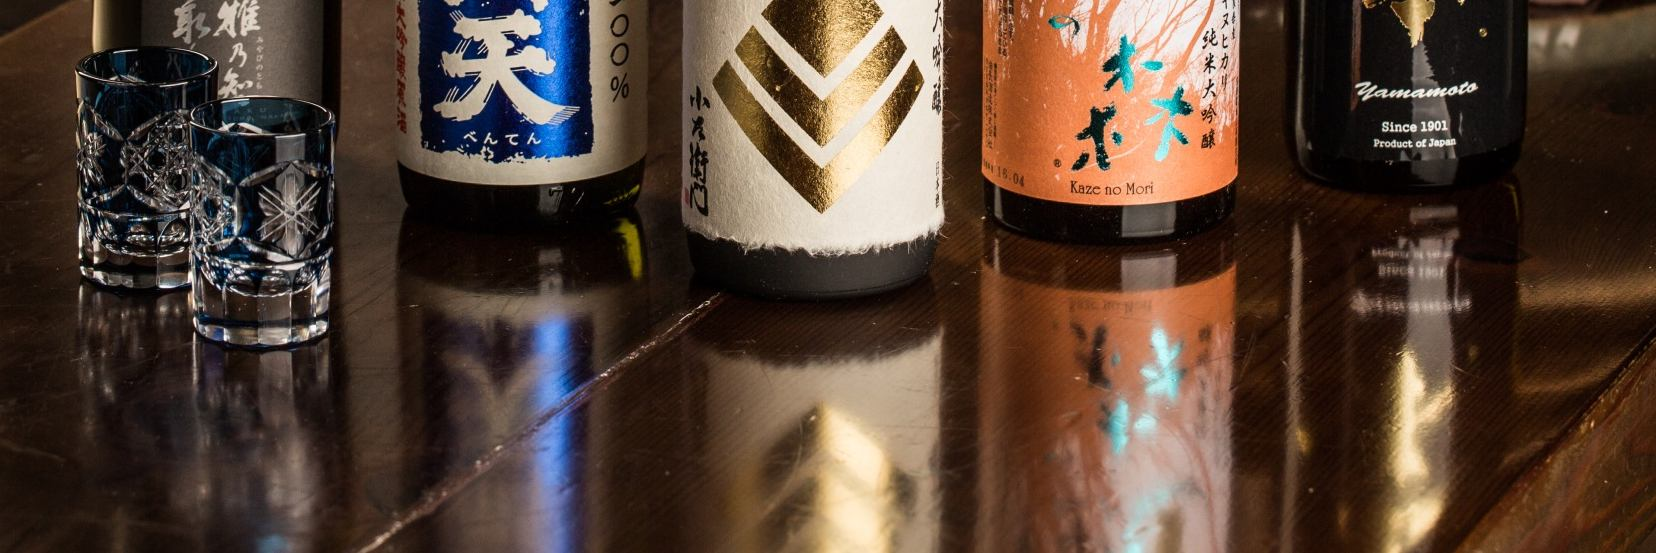 16 THE SAKE BAR The Timber House is delighted to offer a selection of sake